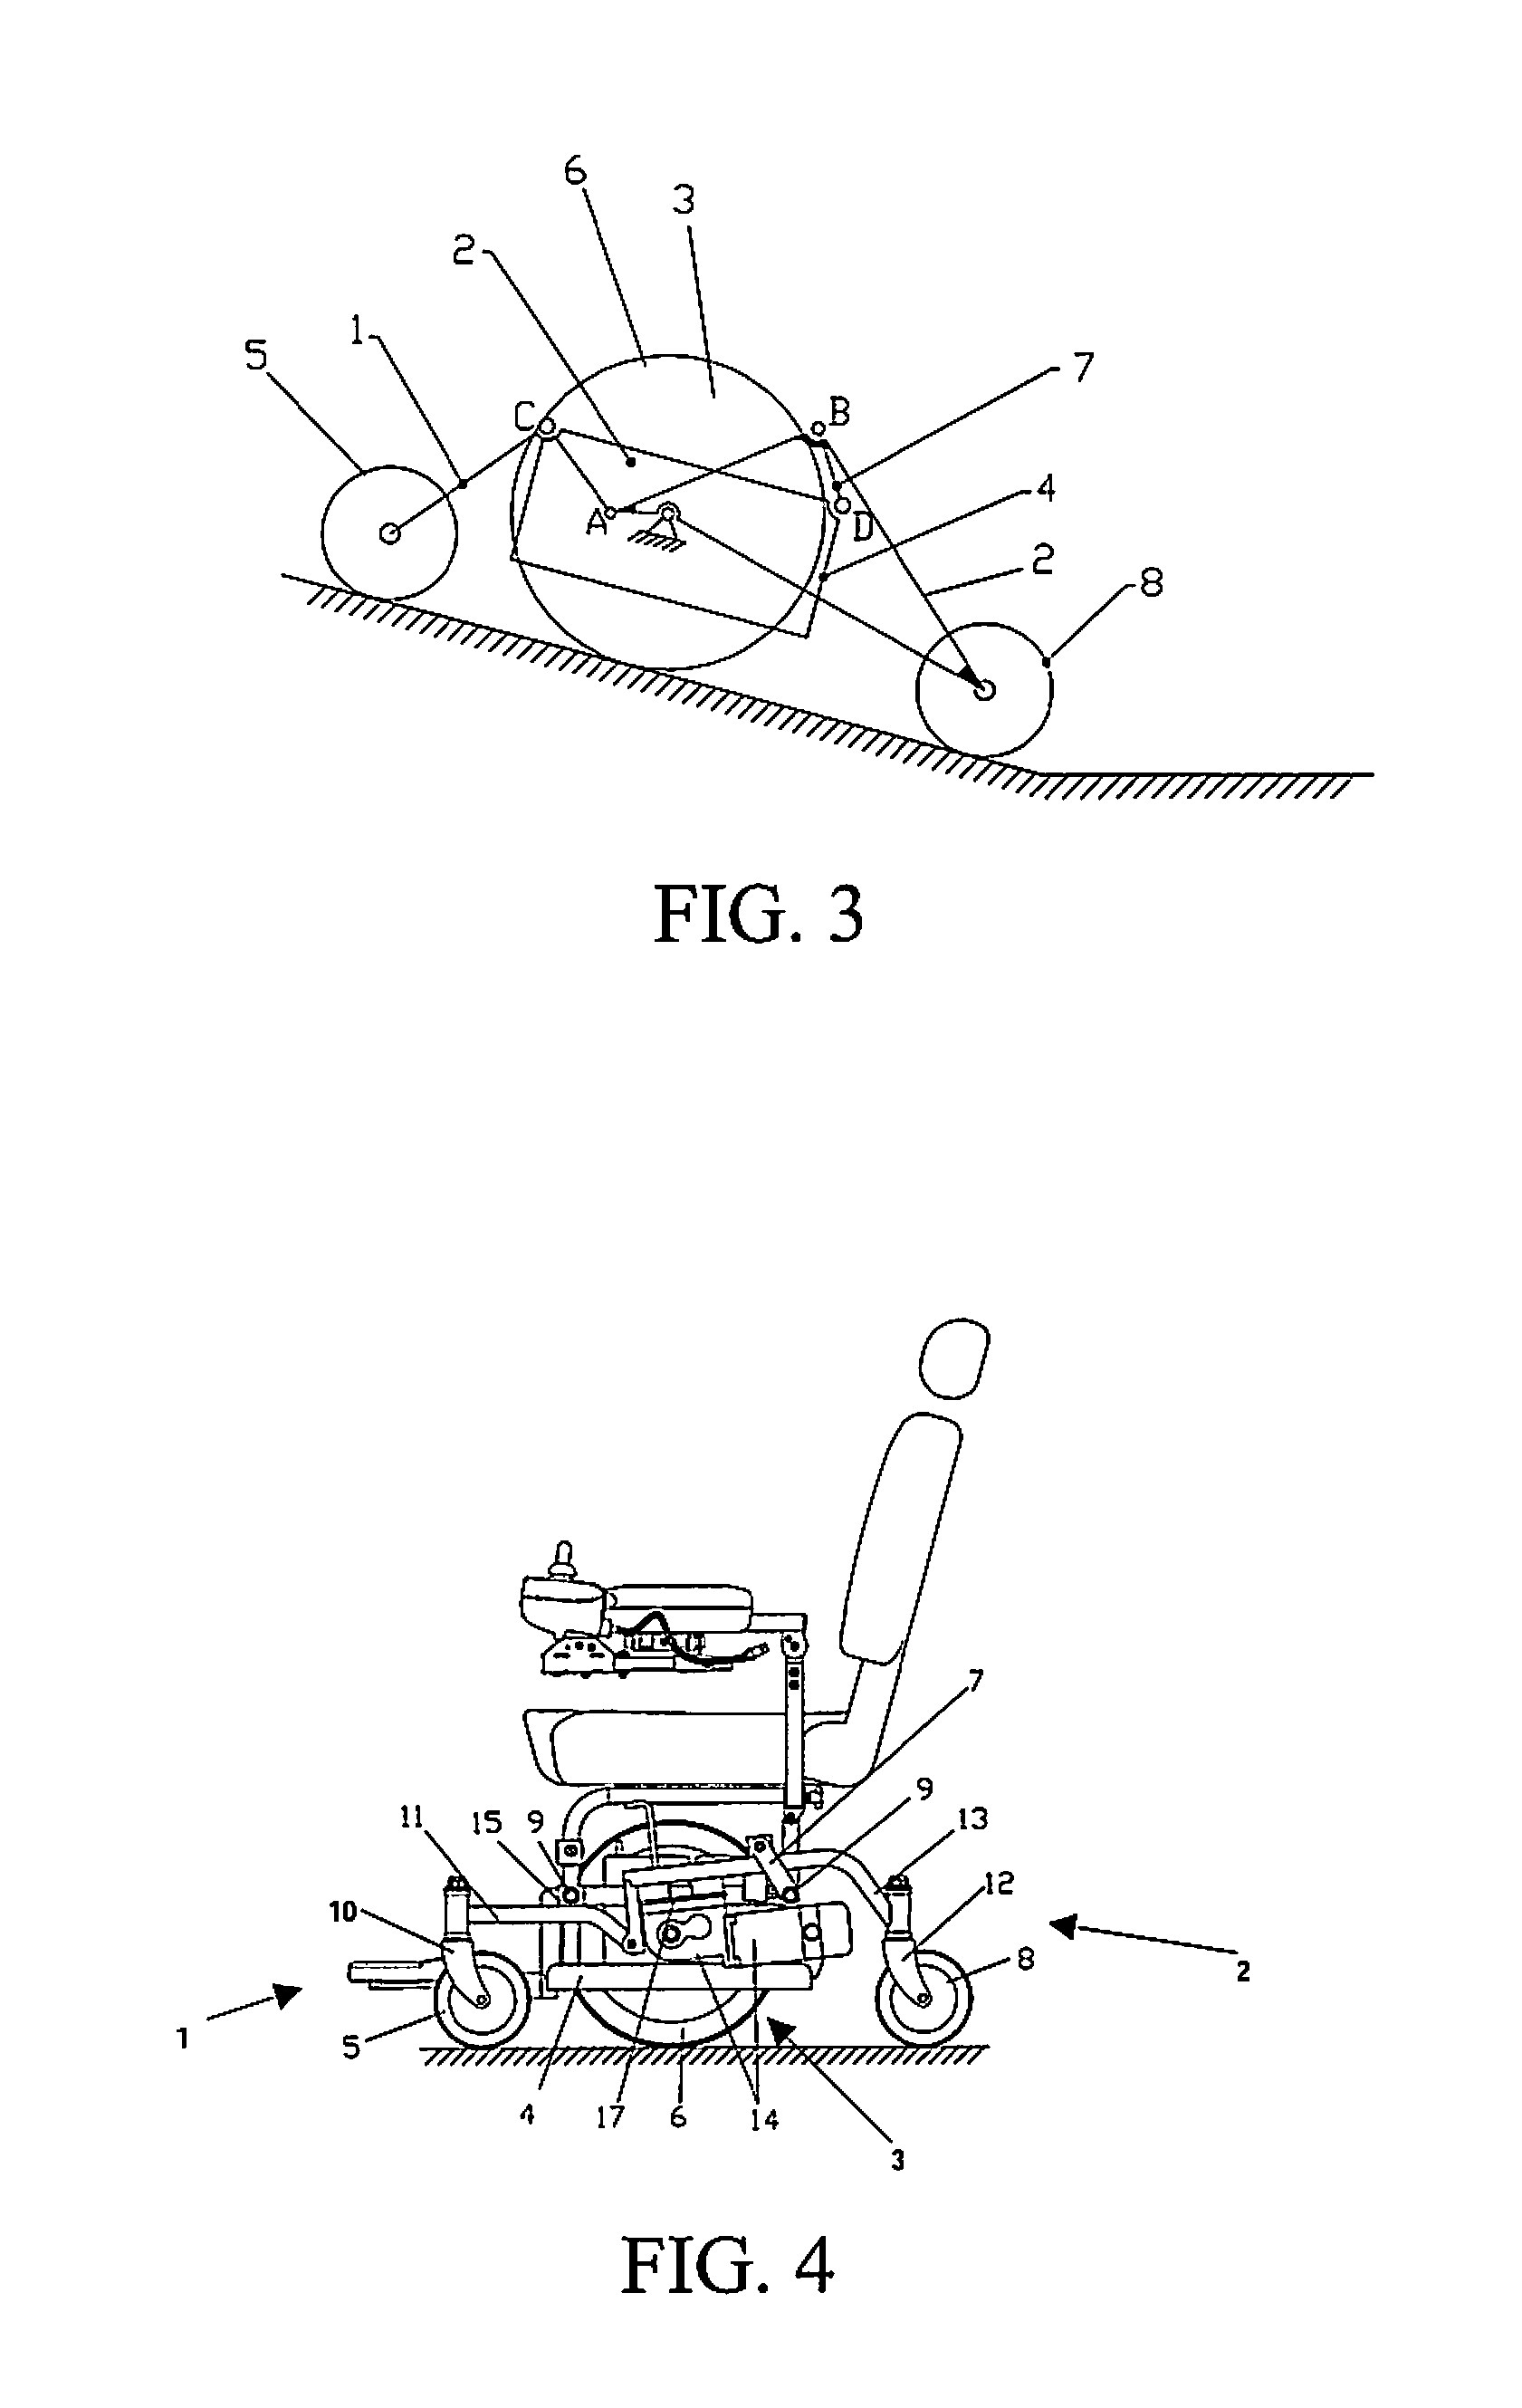 Jointed mechanism of electric wheelchair